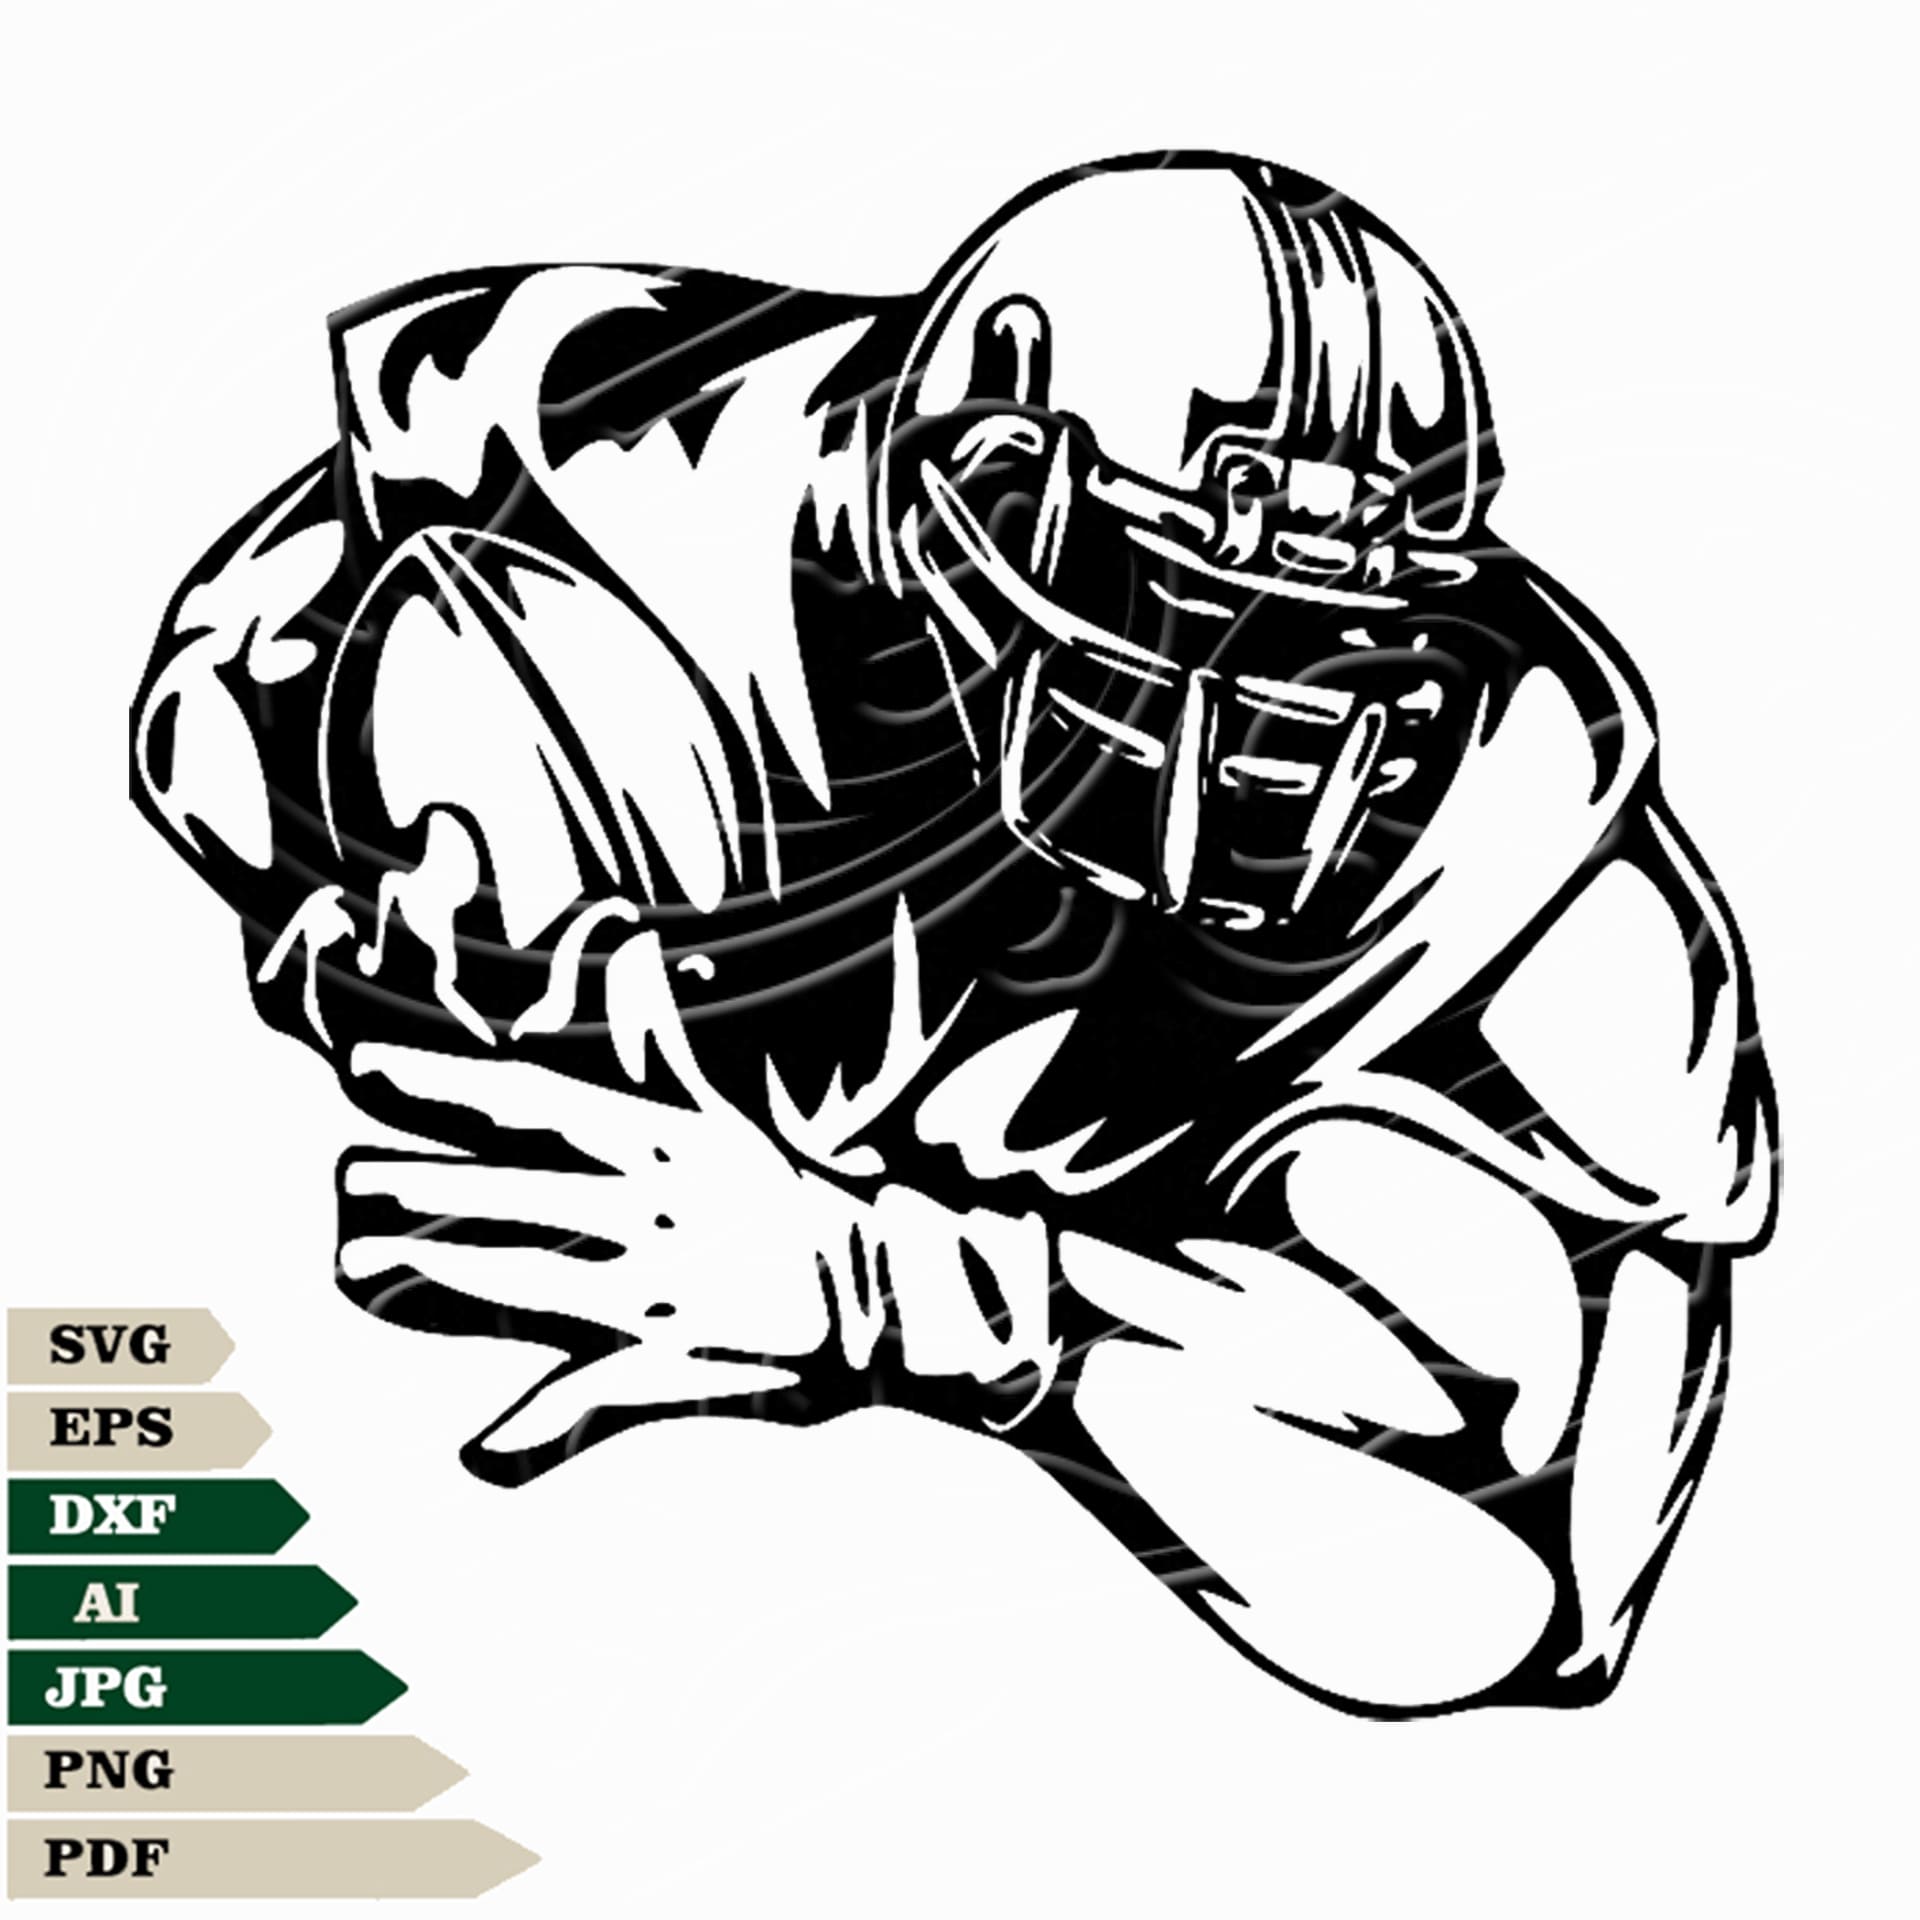 American Football Player Svg File, Football Player Svg Design, Player Png, Football Player Vector Graphics, American Football Player Svg For Tattoo, Player Svg For Cricut